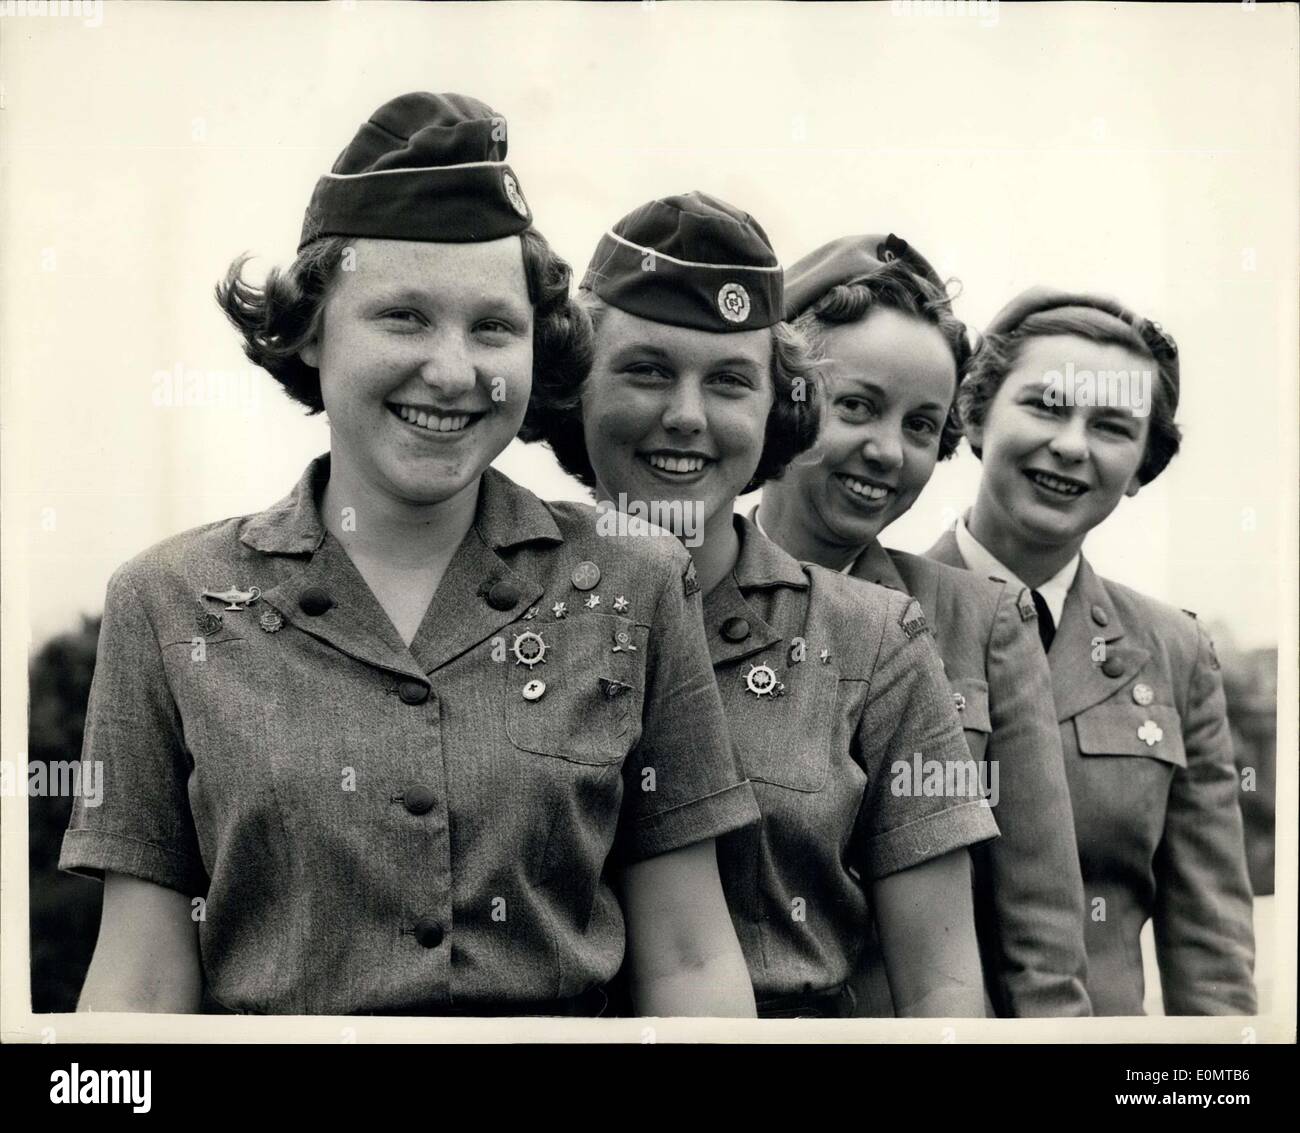 Aug. 17, 1956 - American Girl Scouts In London: Four members of the Girl Scouts of the United States of America who have been taking part in Girl Guide activities in different pats of the country for the past two months-are spending the exchange visit-their expenses having been from the Juliette Low Fund-contributed to by all members of the U.S.A Girl Guides. Photo shows The four girls at the London Guide Headquarters this morning. They are in L-R-Gail Graham (17) of Rhede Island: Nancy Sears (18) from California; Mrs Stock Photo